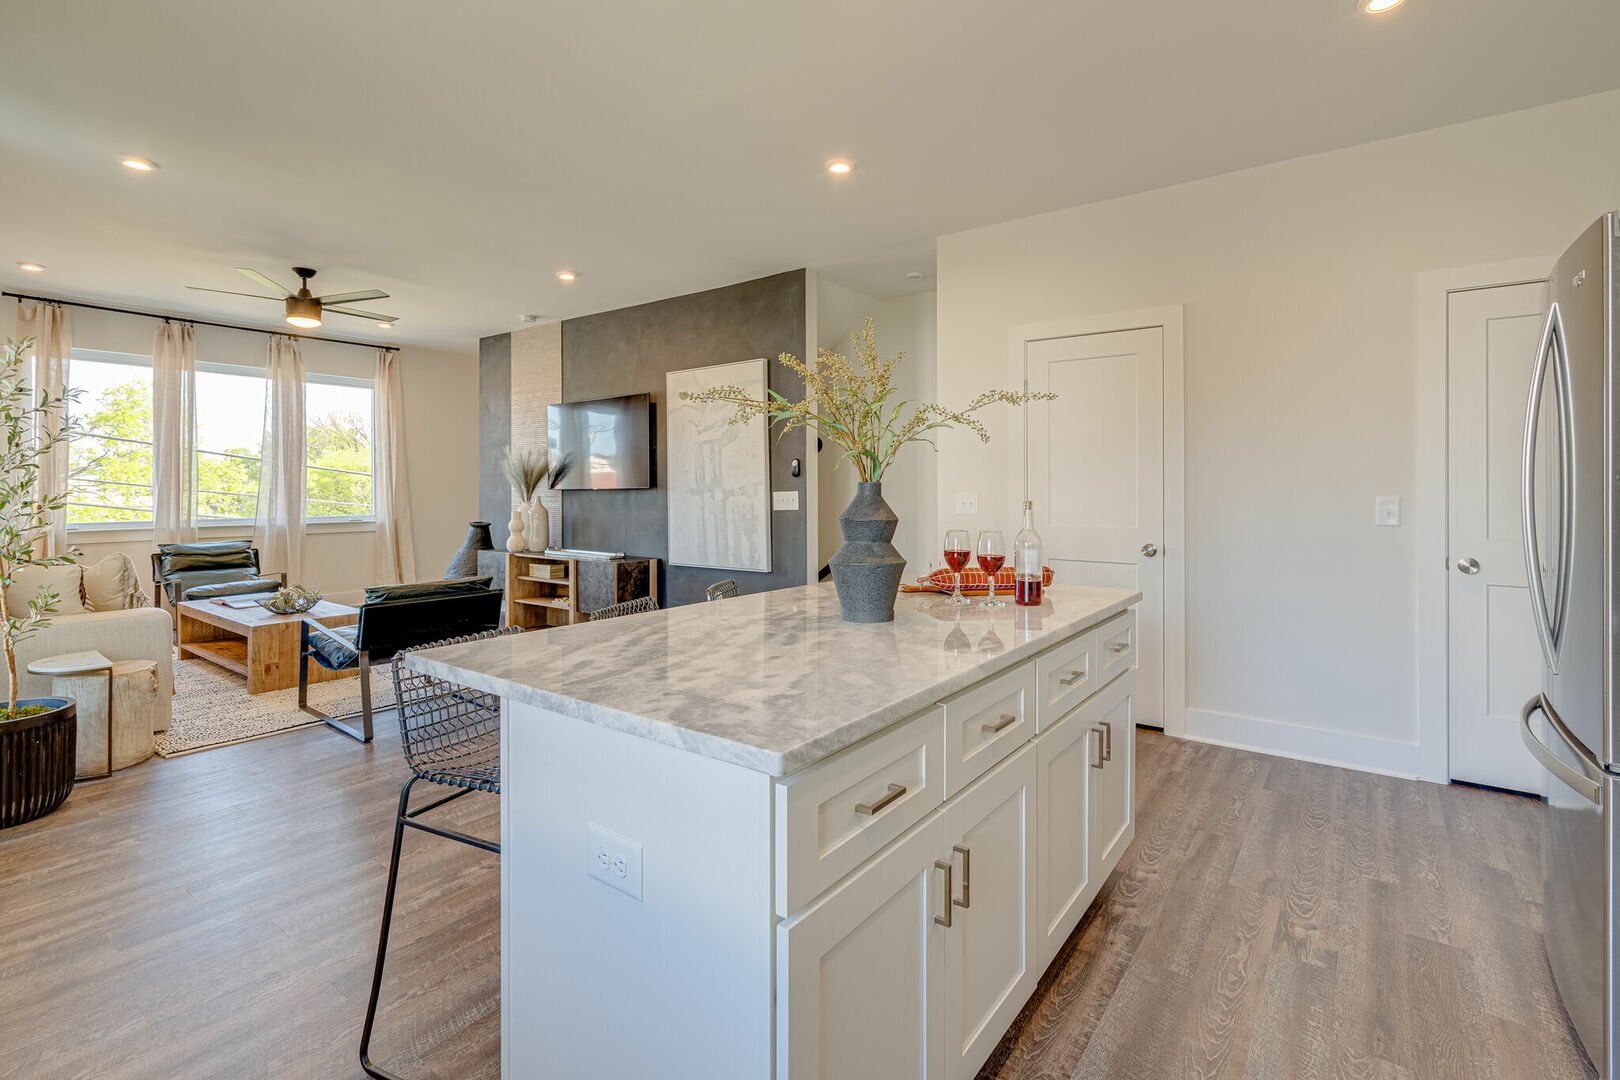 2nd floor: Fully equipped kitchen stocked with basic cooking essentials and stainless steel appliances overlooking the designer furnished living room.